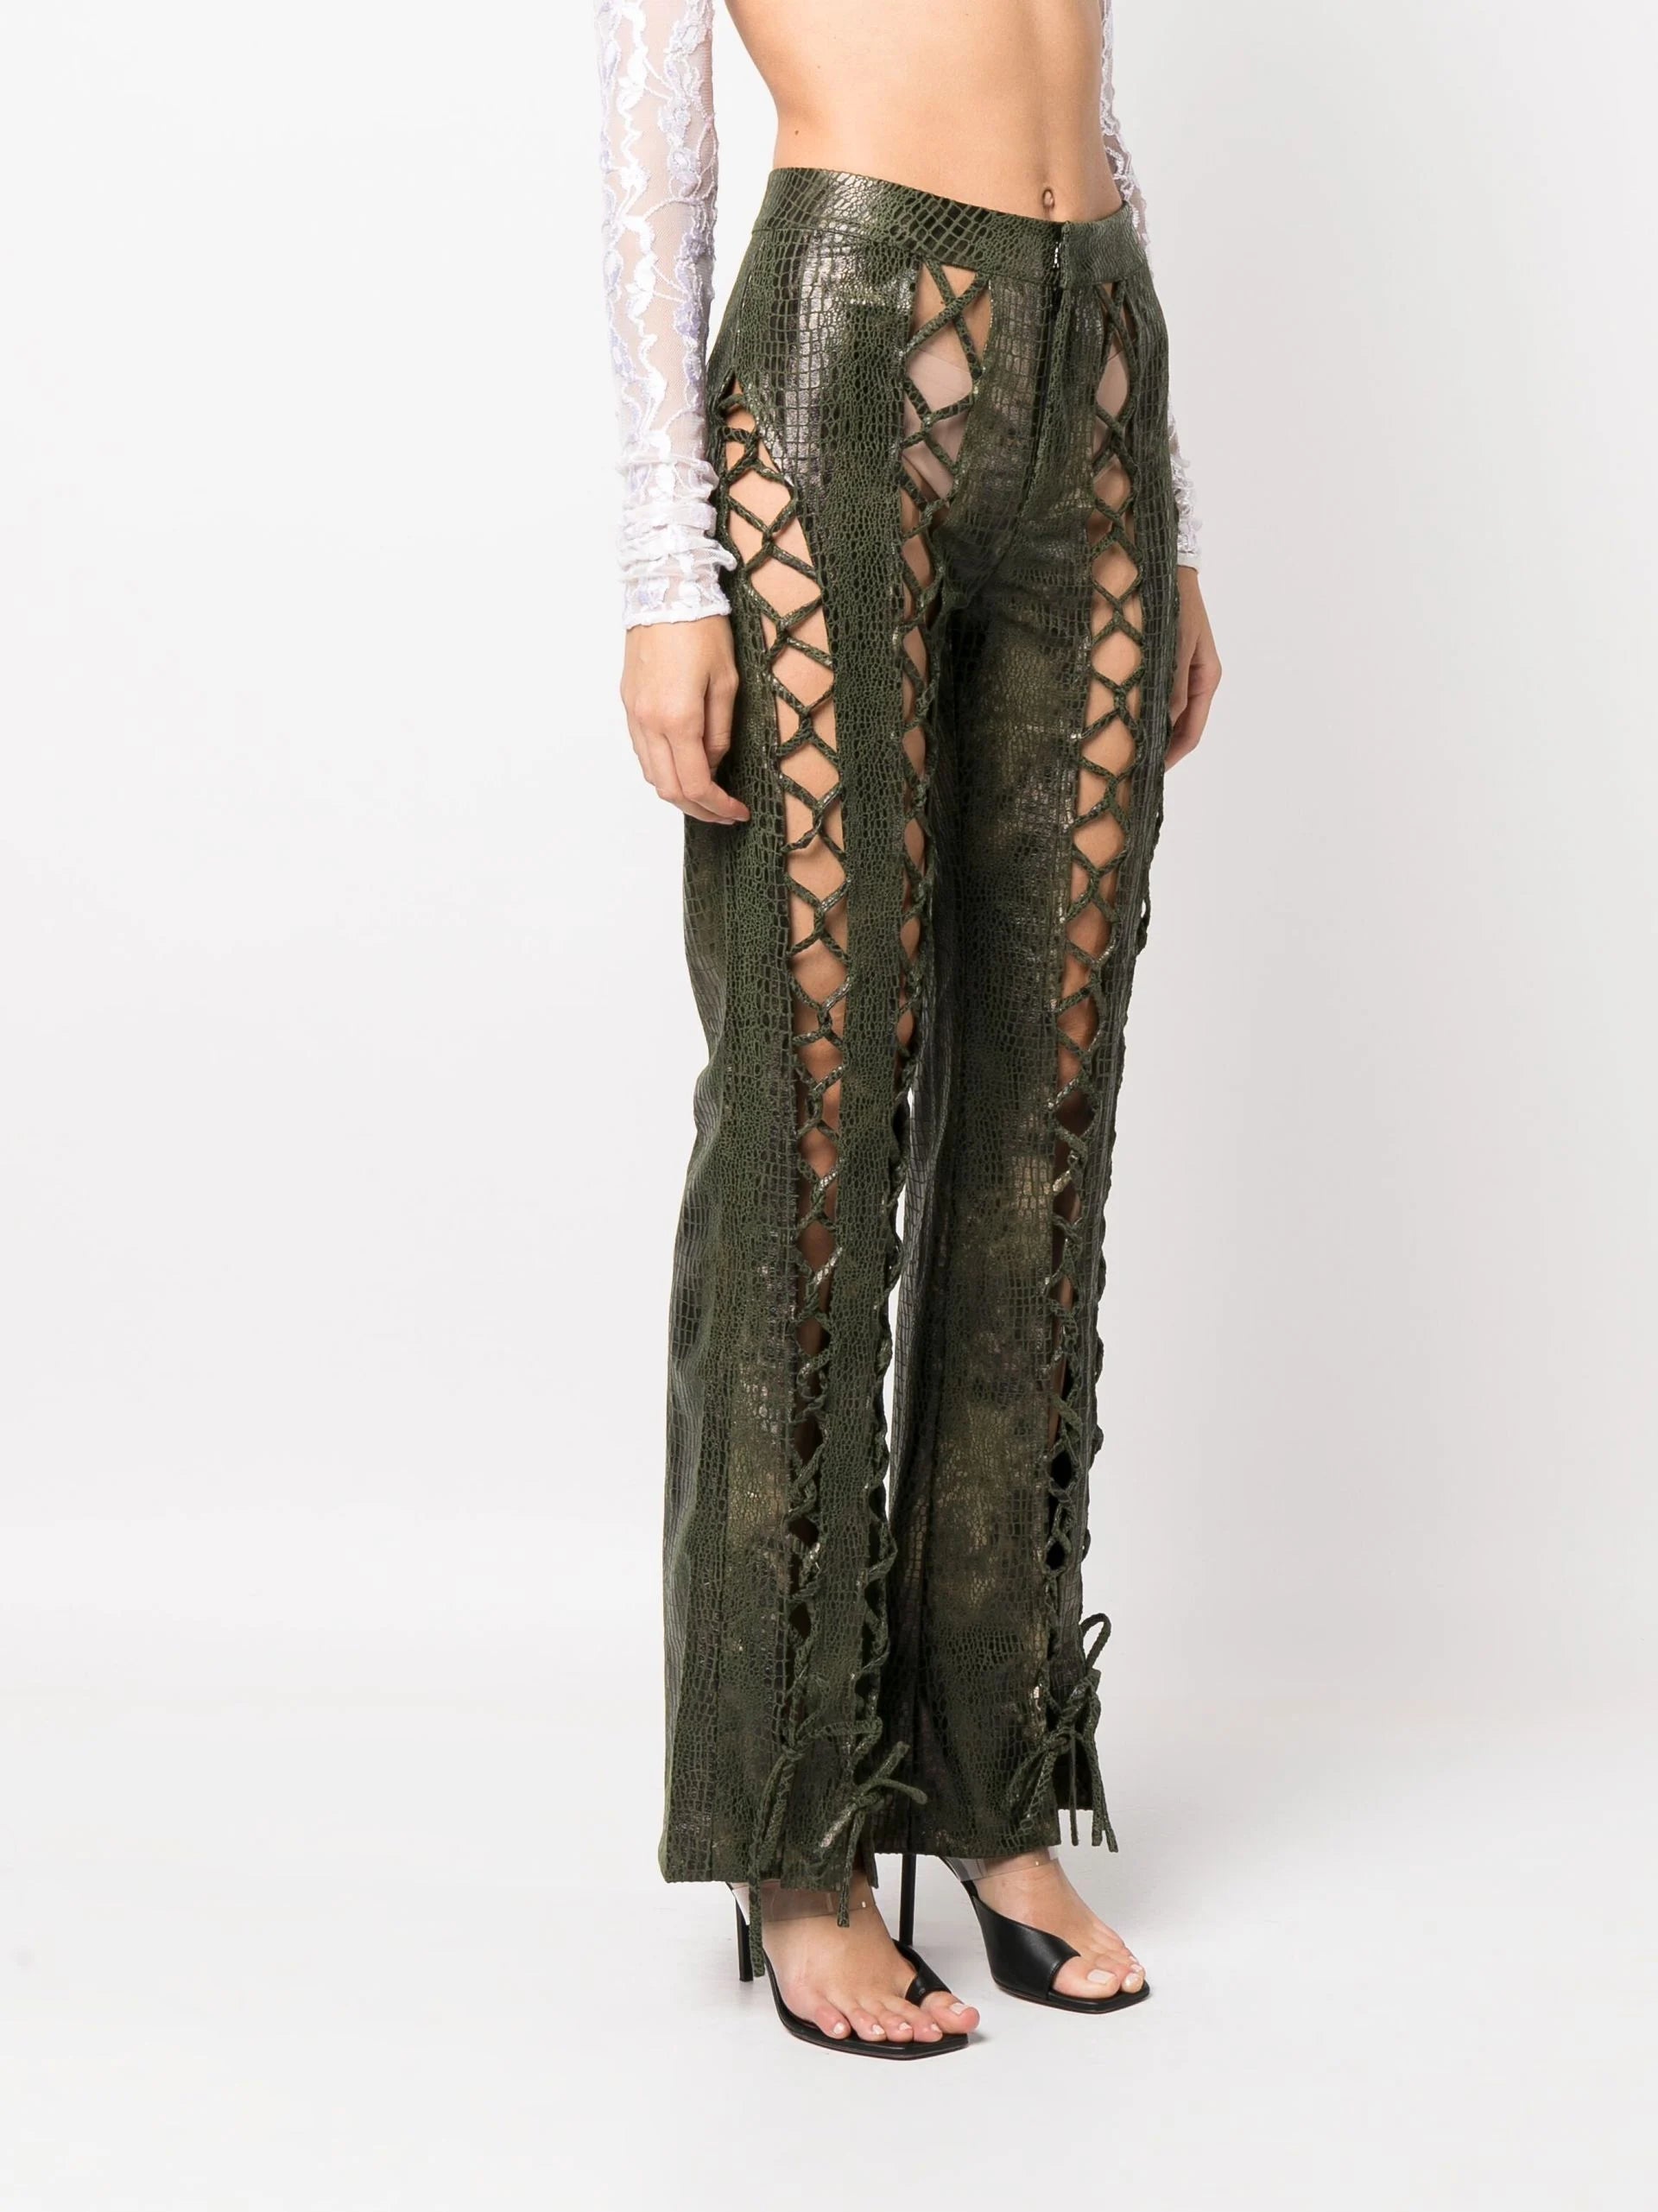 Lace-Up Trousers Are The Wild Trend You'll See Everywhere This Summer |  British Vogue